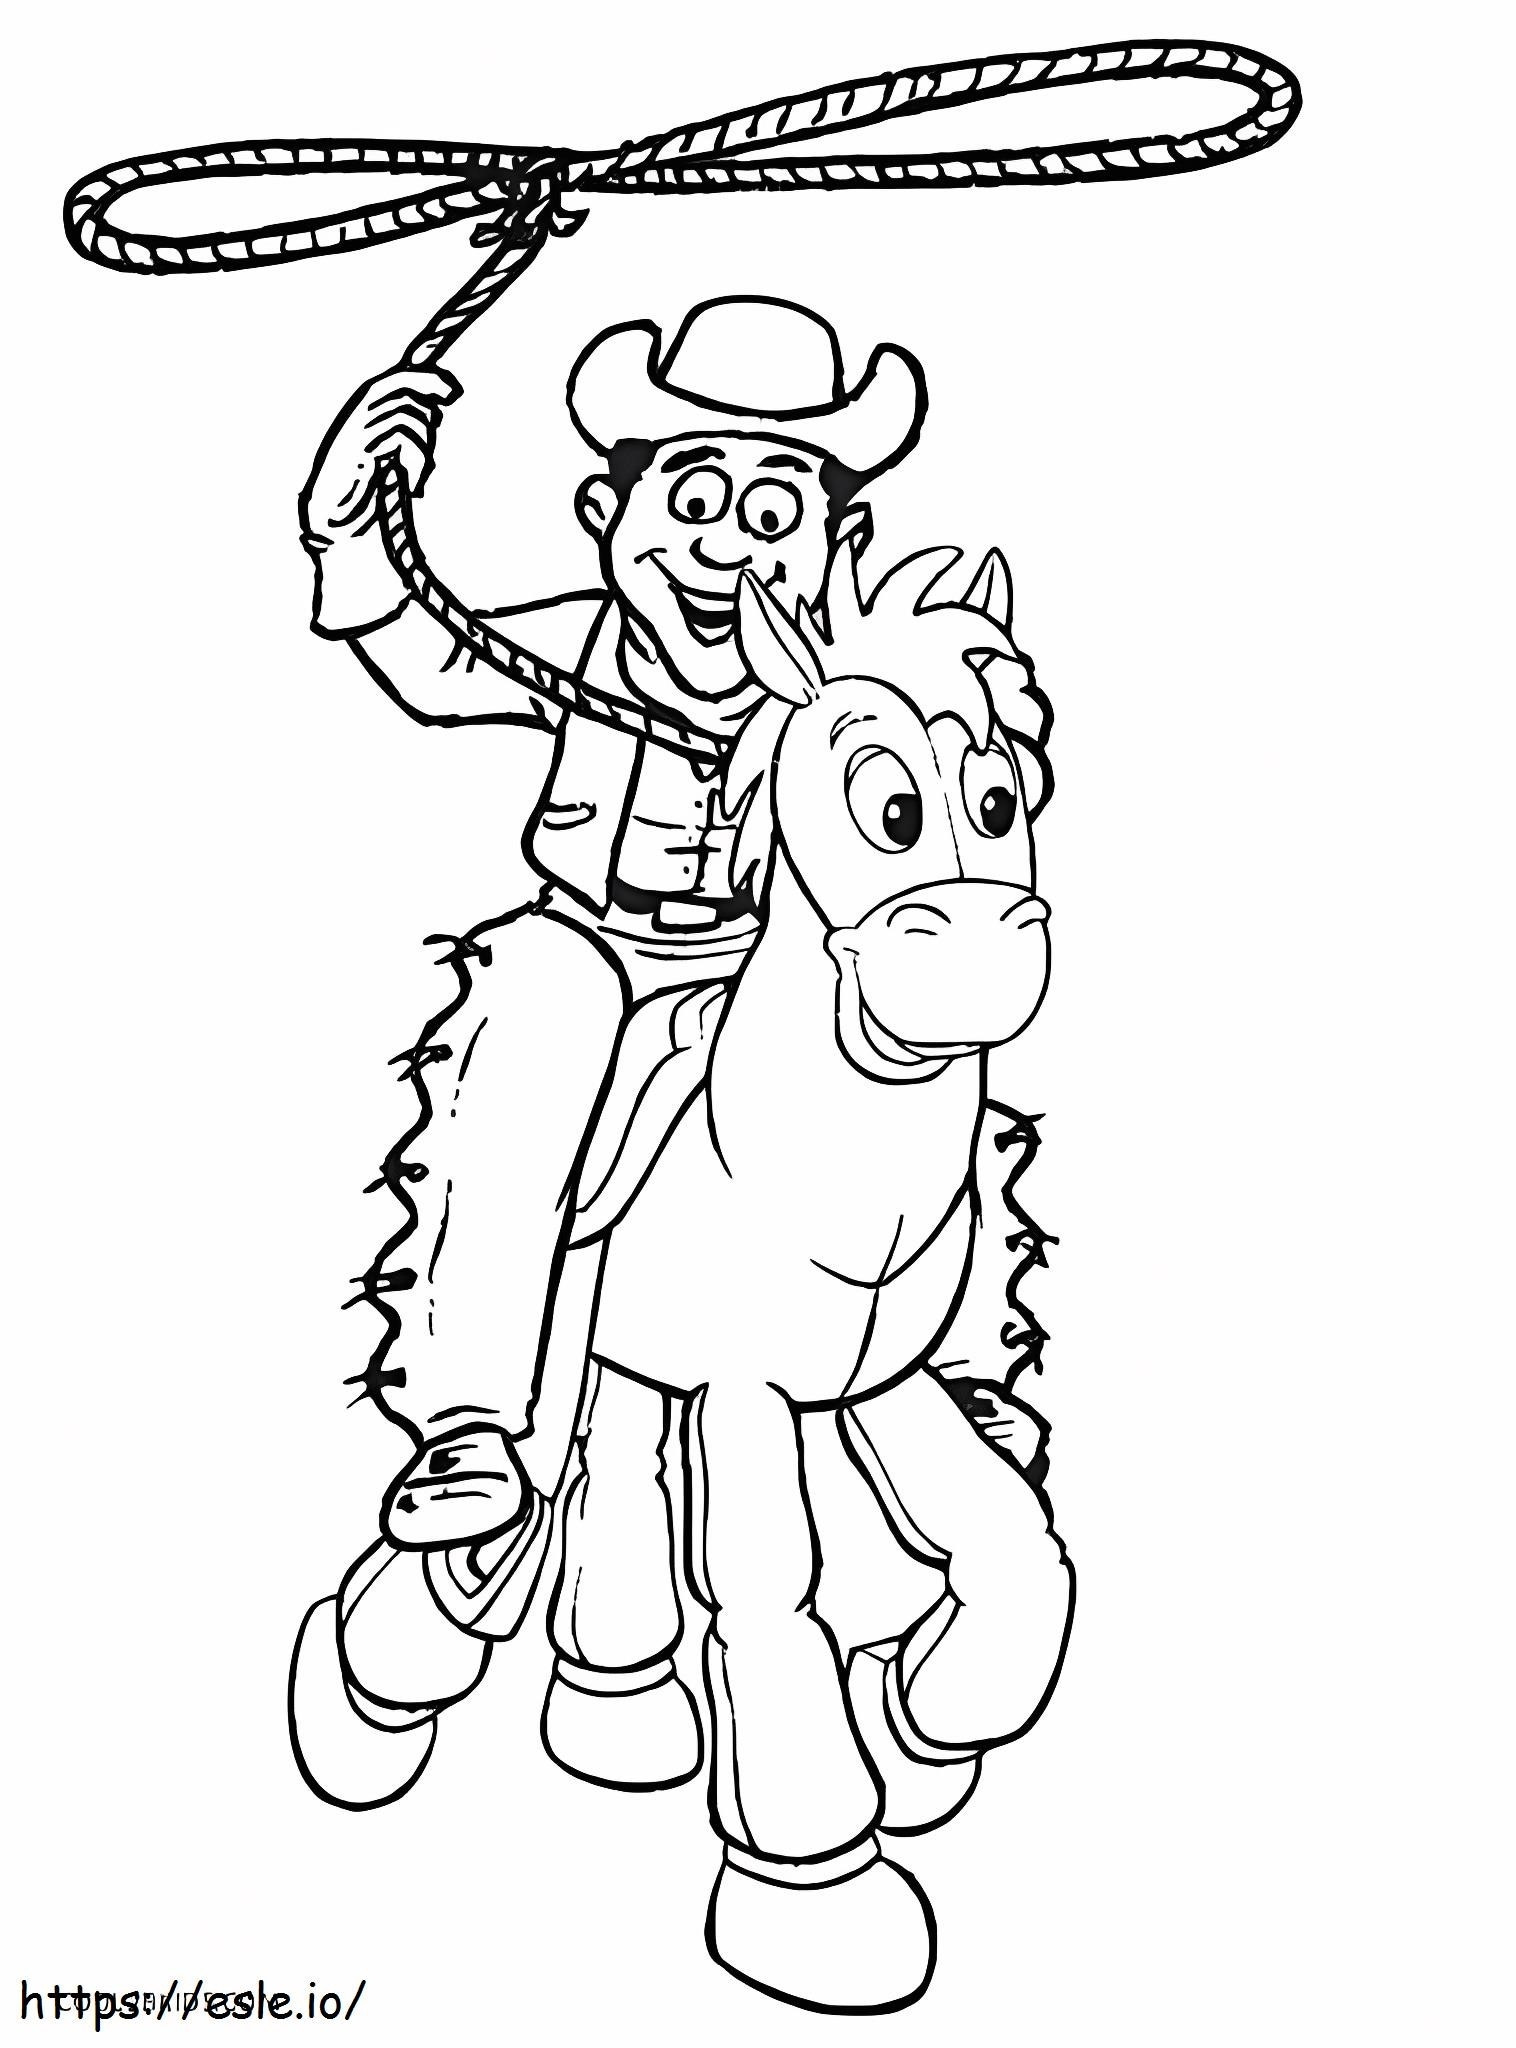 Awesome Cowboy coloring page